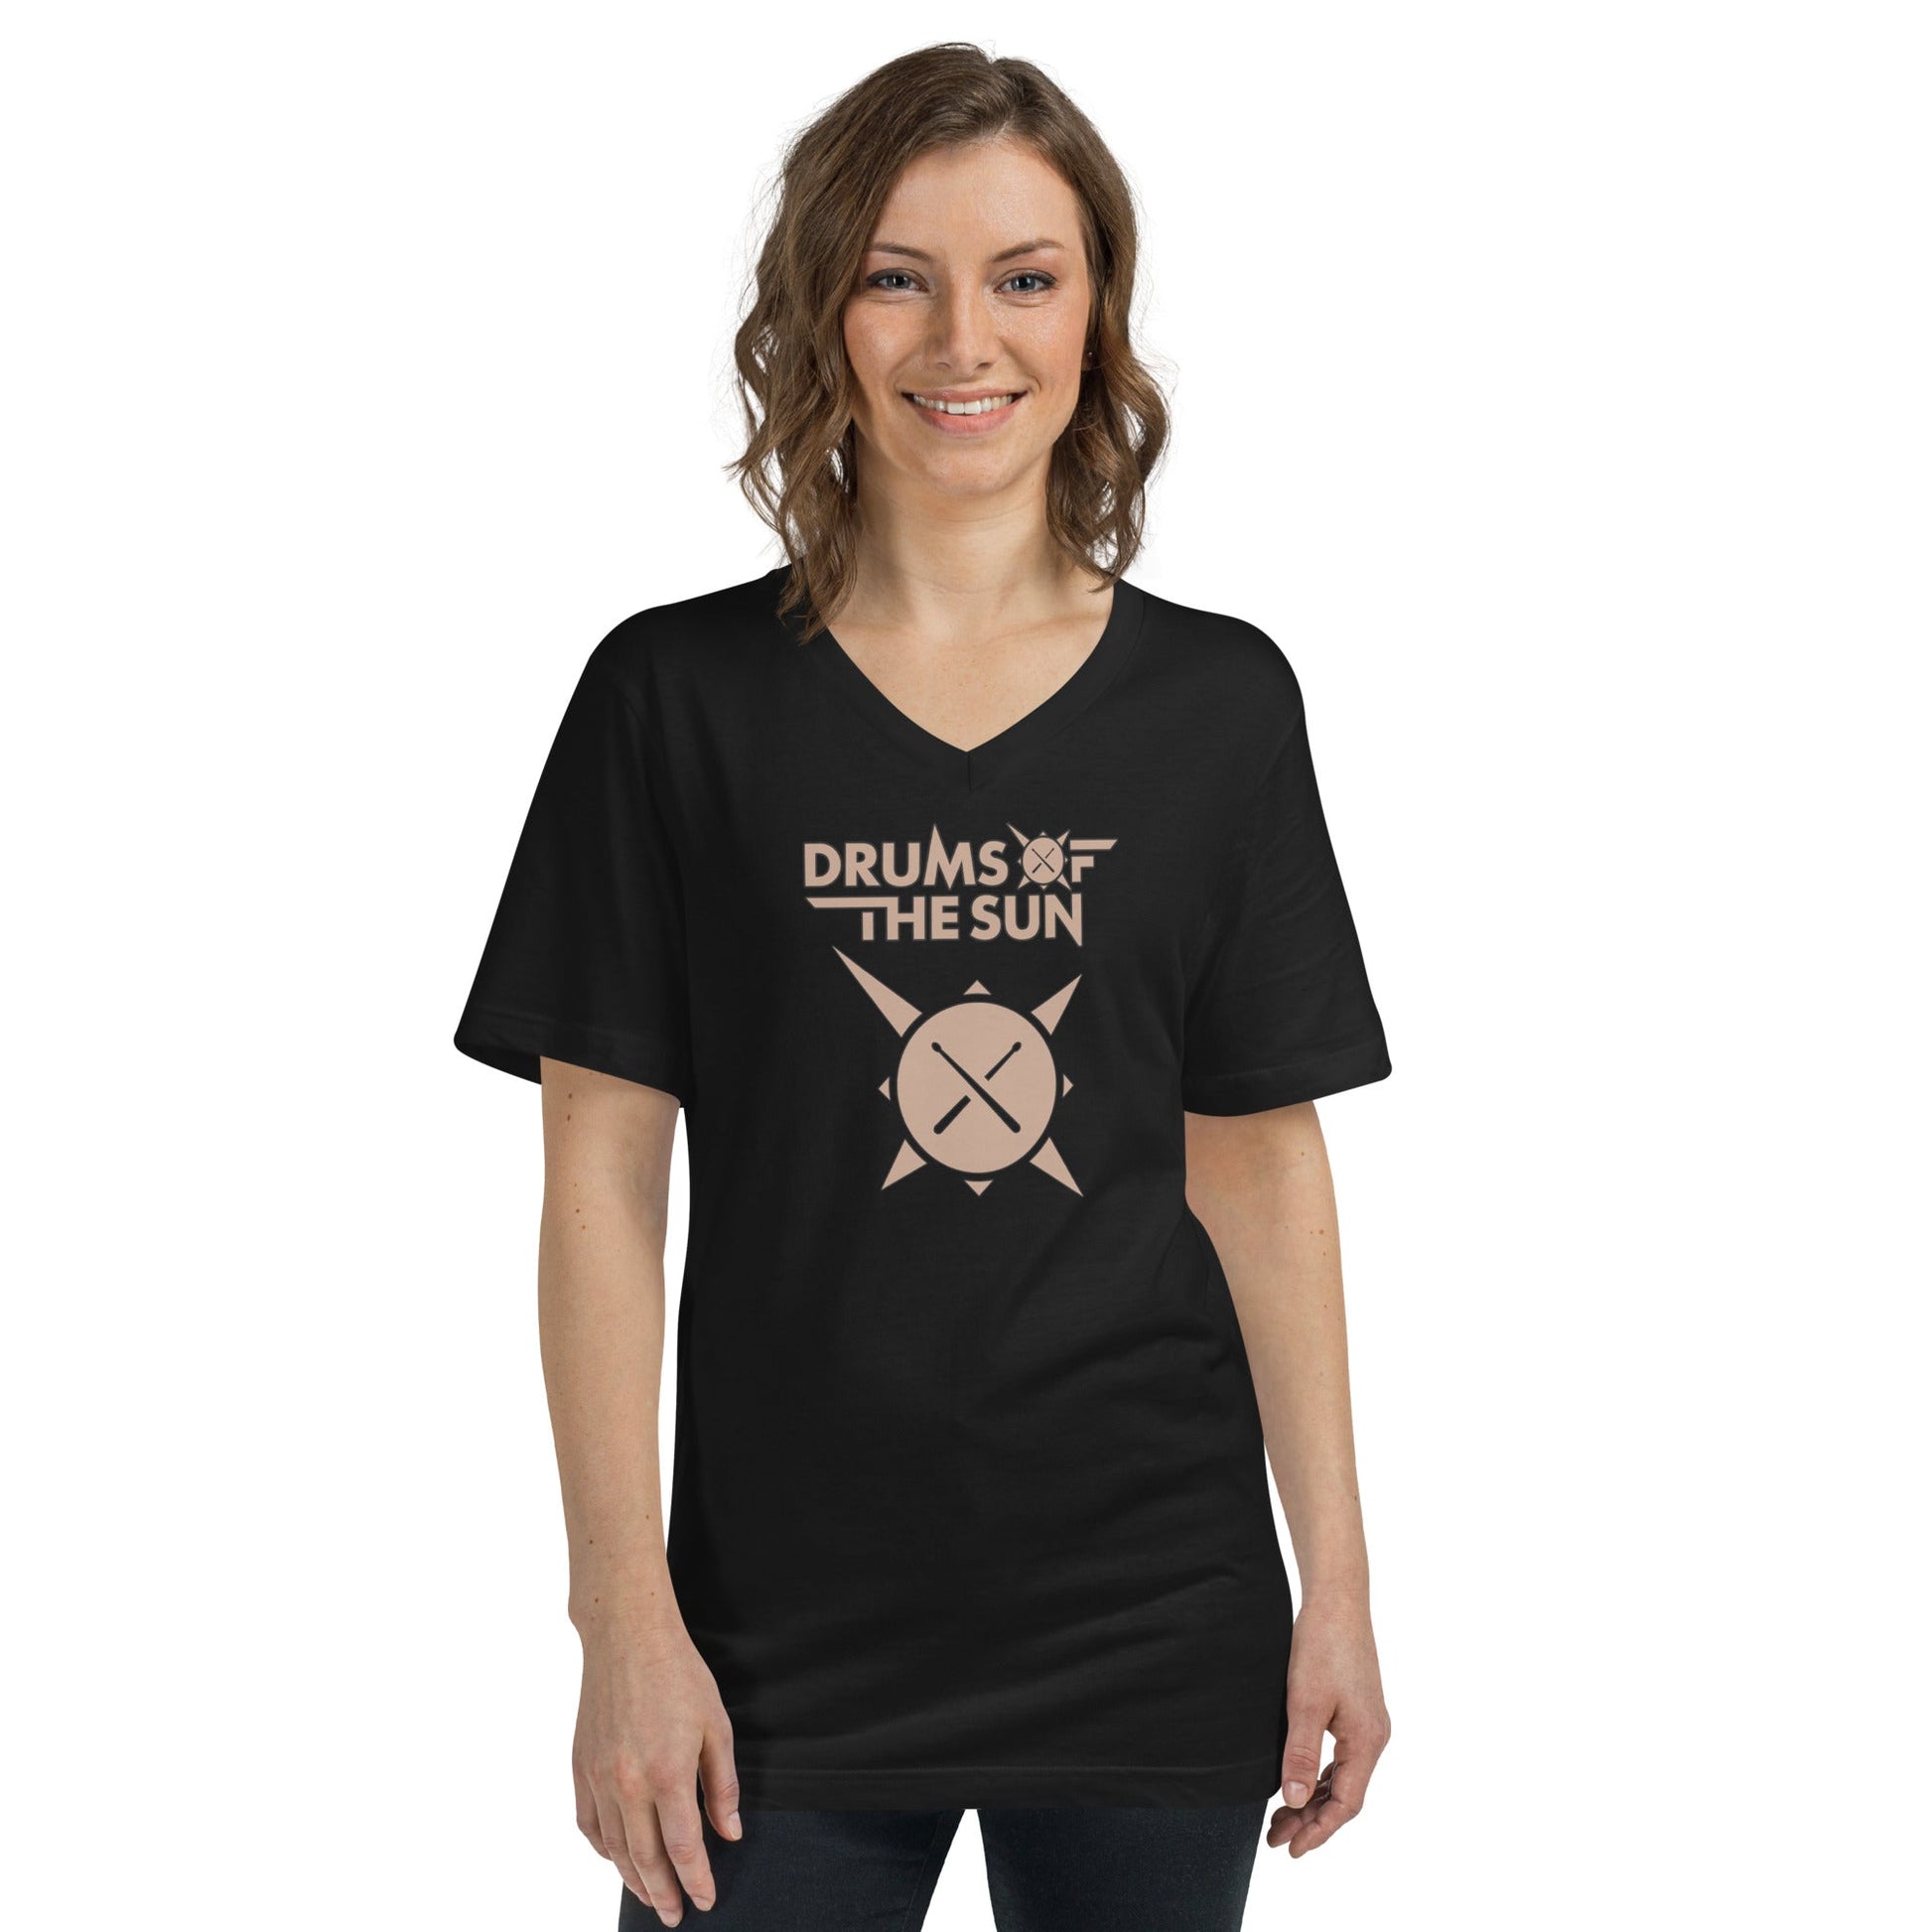 Drums of the Sun Unisex Short Sleeve V-Neck T-Shirt - BeExtra! Apparel & More